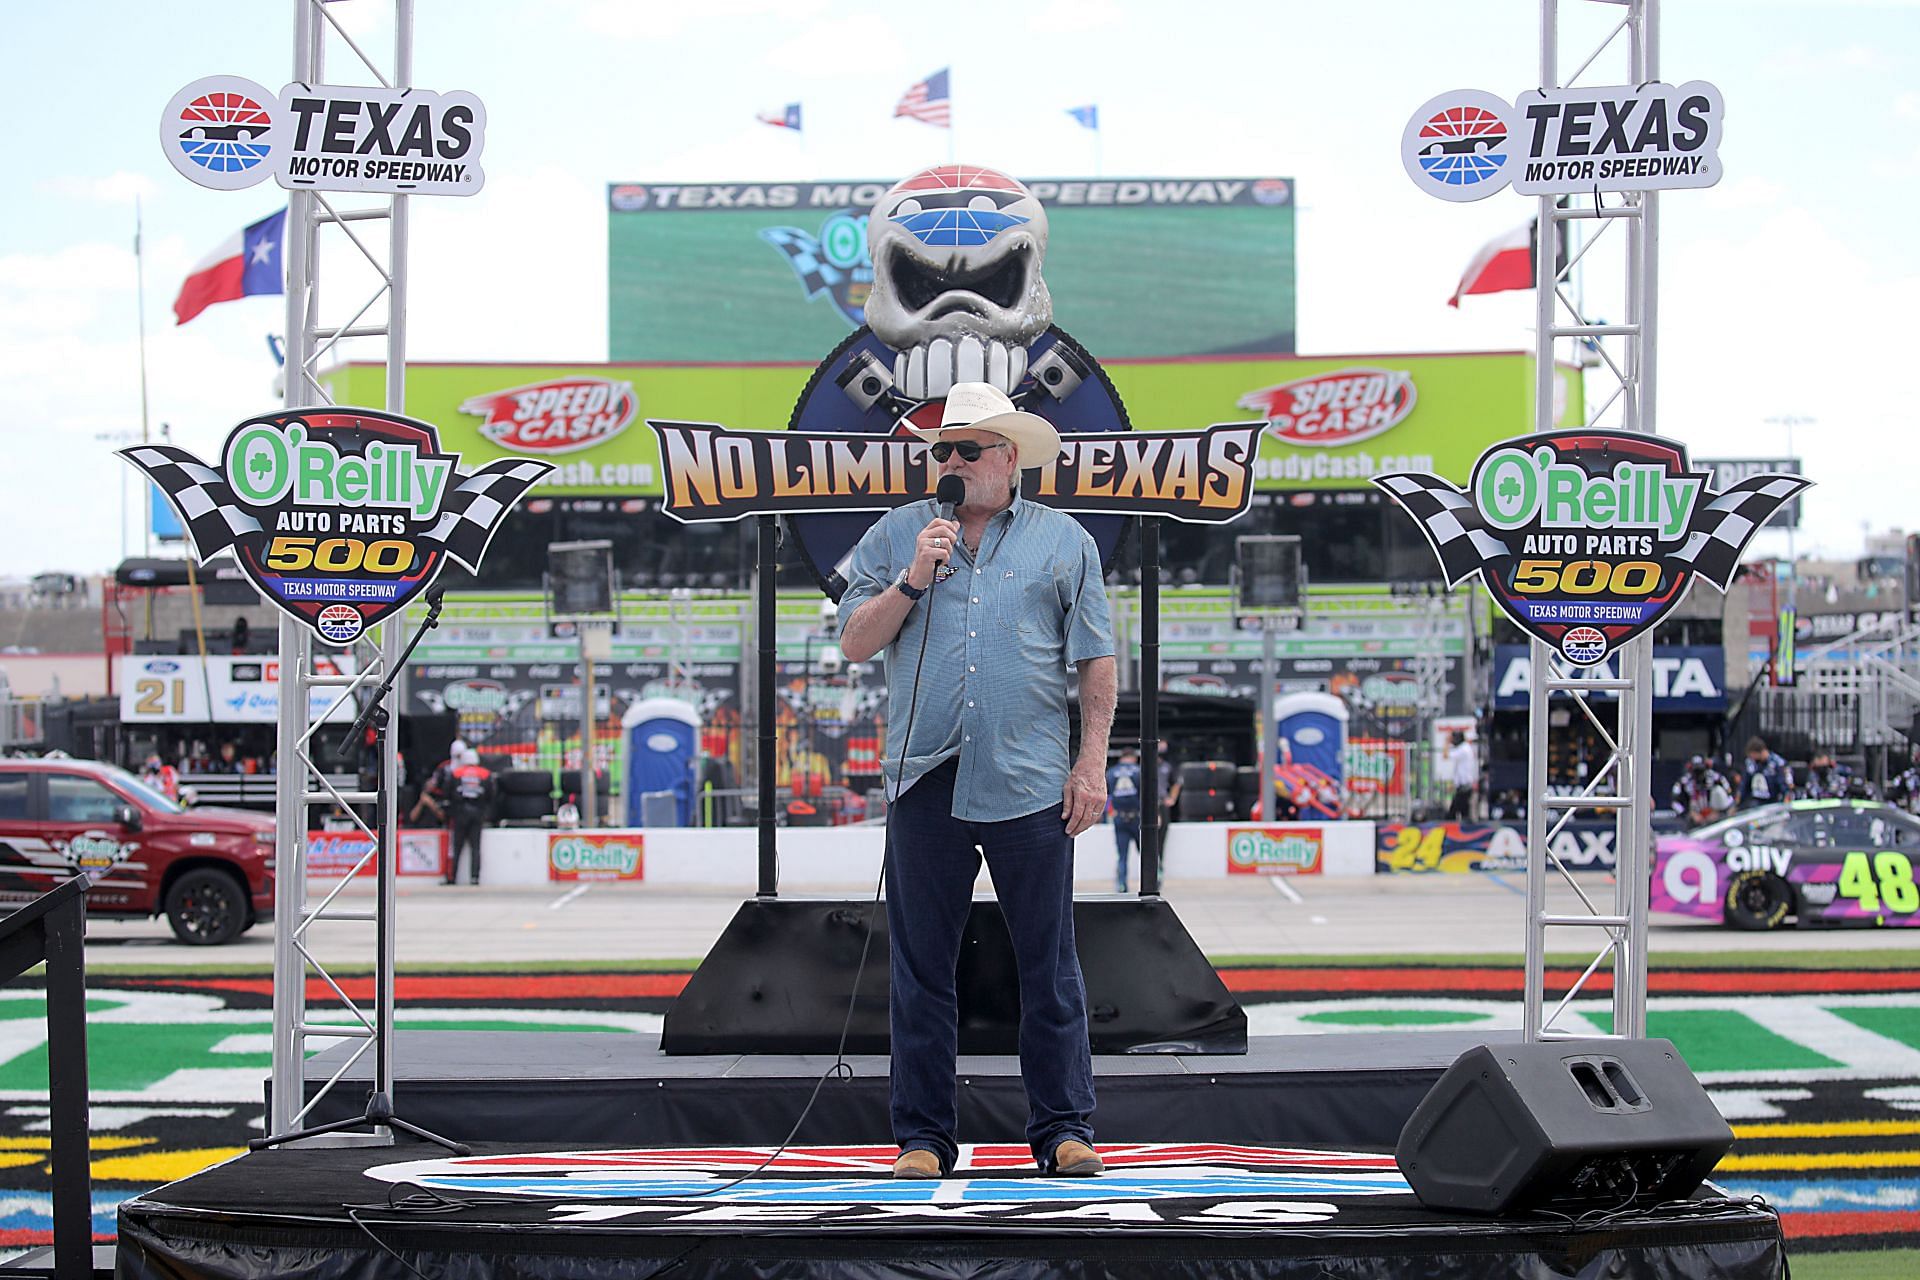 Former Pittsburgh Steelers QB Terry Bradshaw gives the command prior to a race Texas Motor Speedway in 2020 (Photo: Getty)